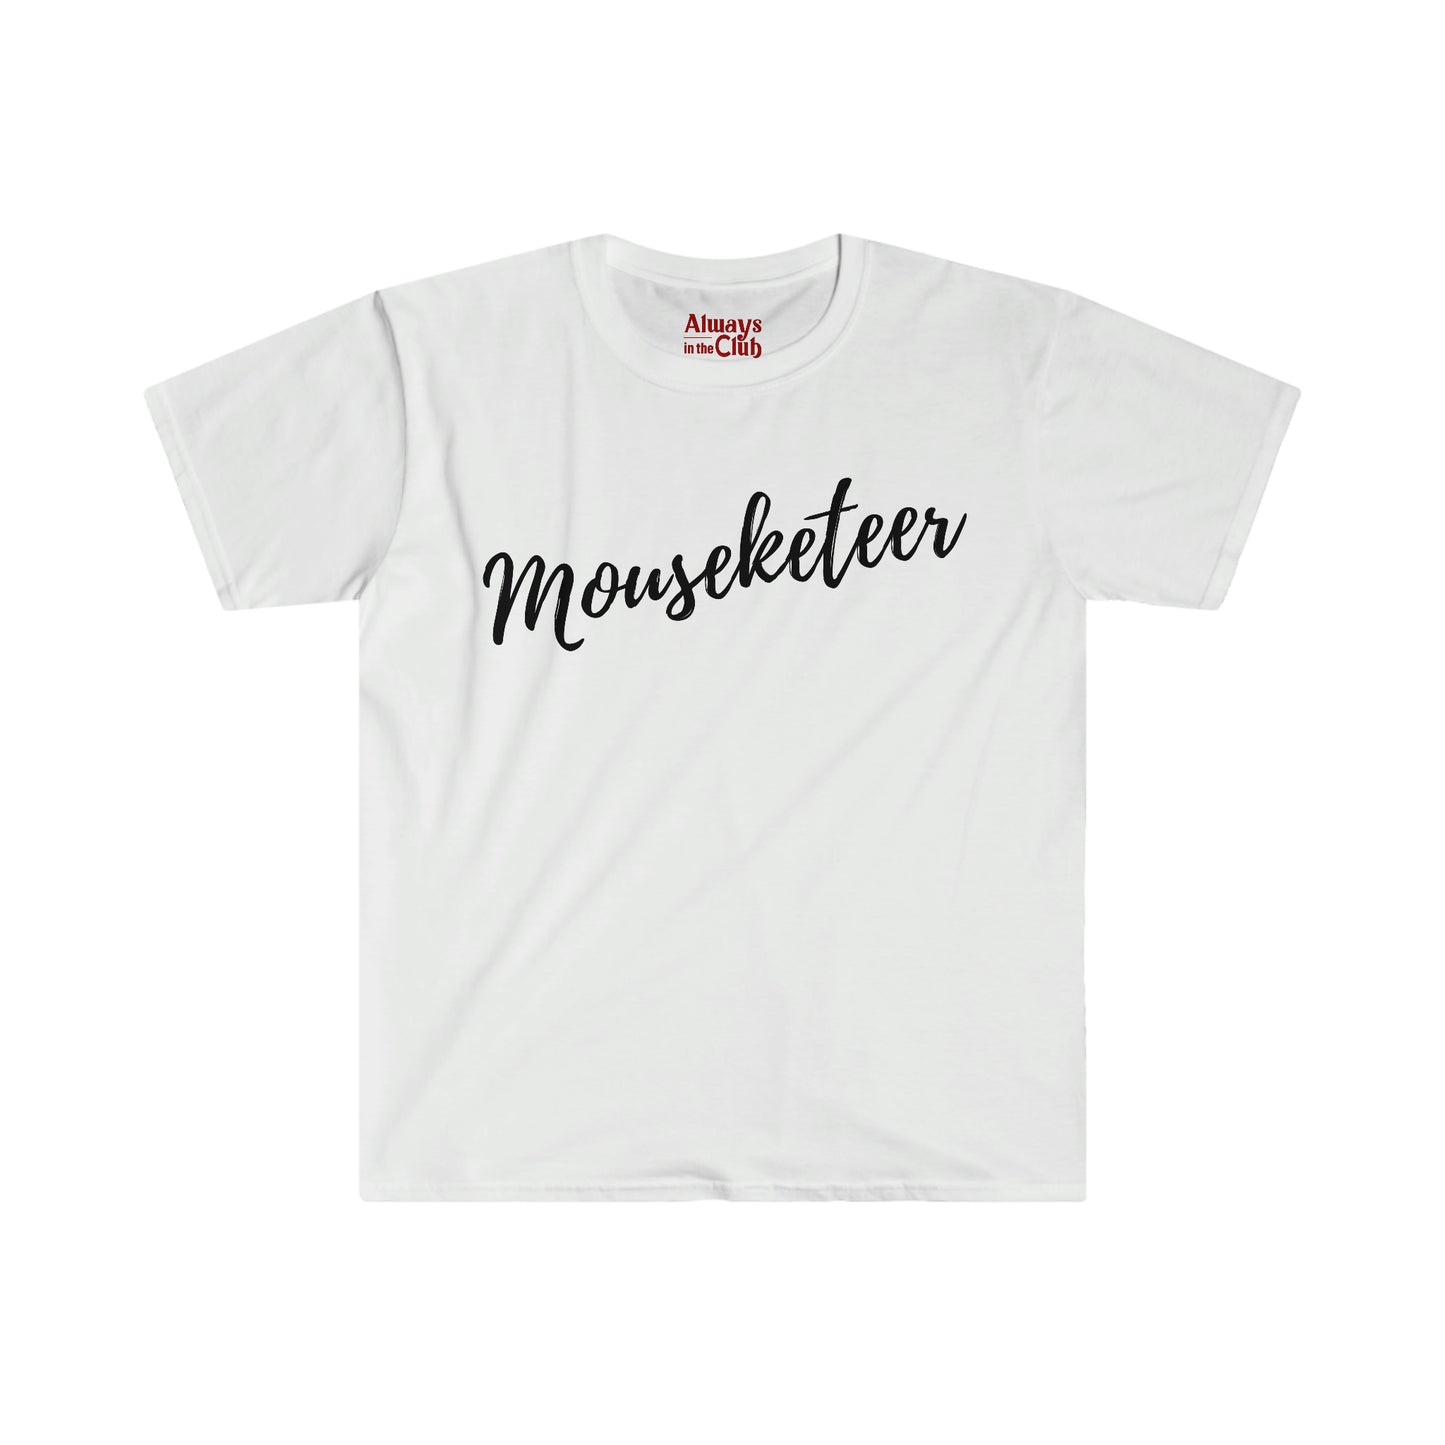 Always In The Club's Mouseketeer Unisex Softstyle T-Shirt - CLUB MEMBER EXCLUSIVE